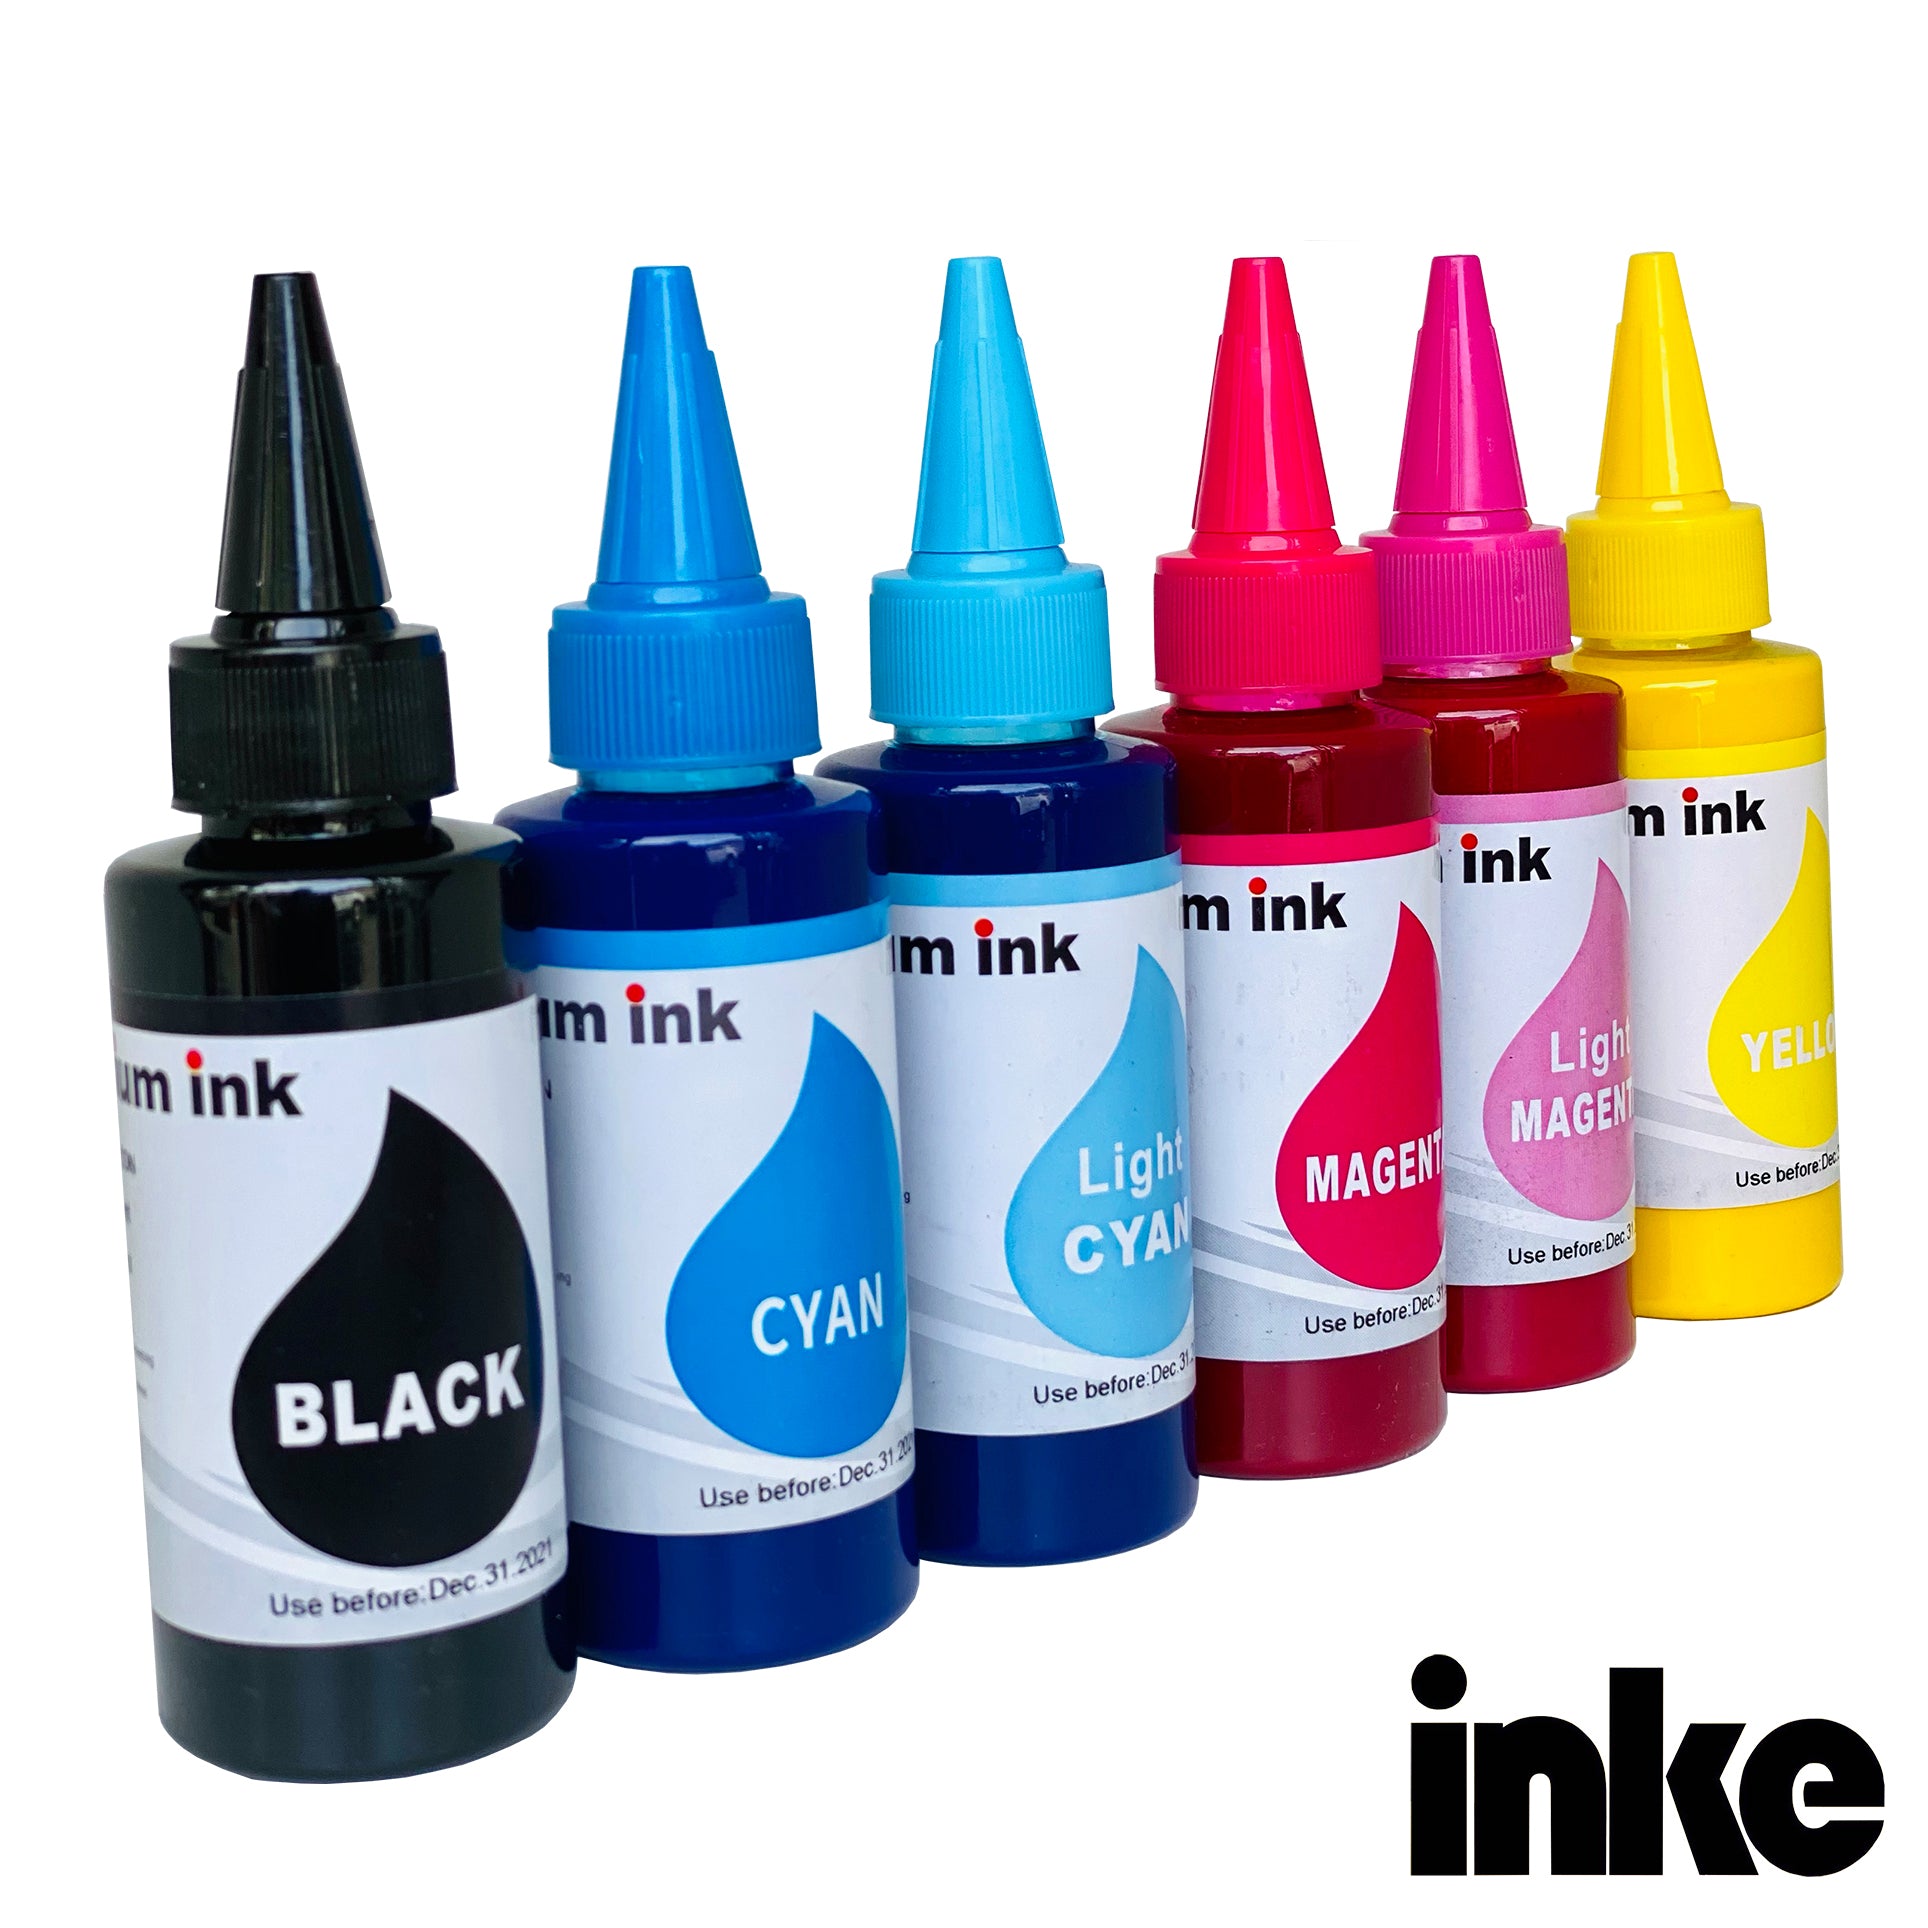 How to Make Permanent Black Ink